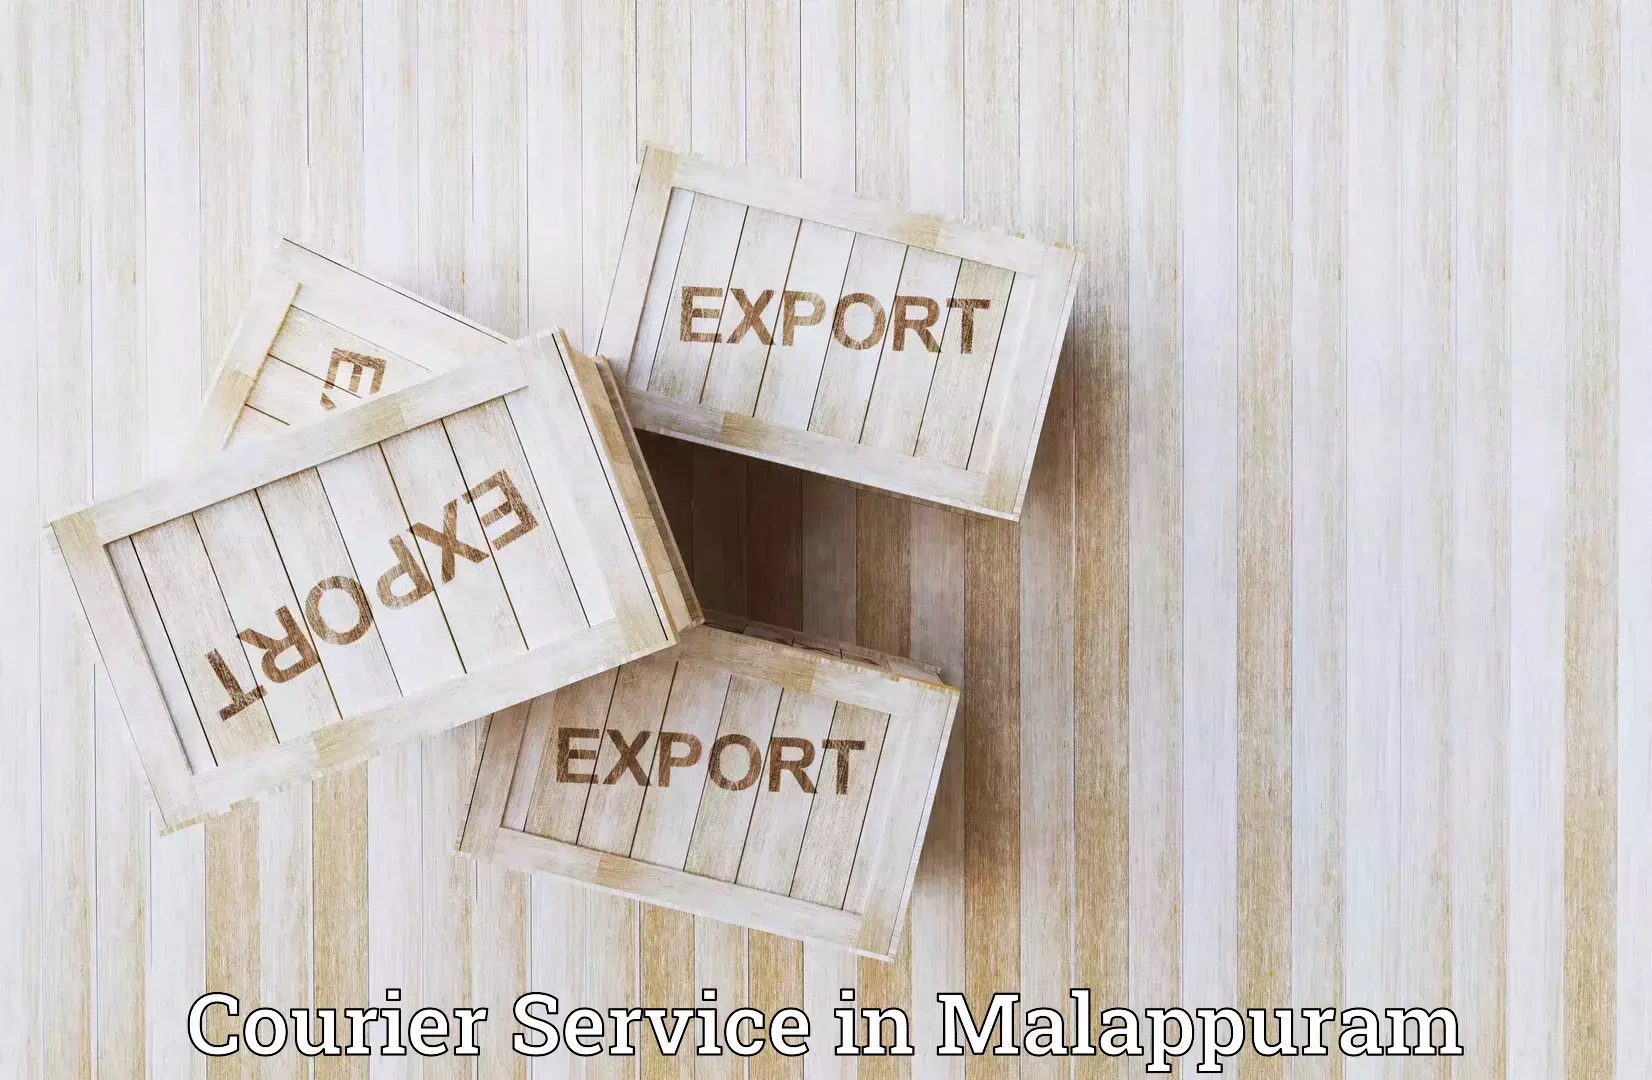 Overnight delivery services in Malappuram